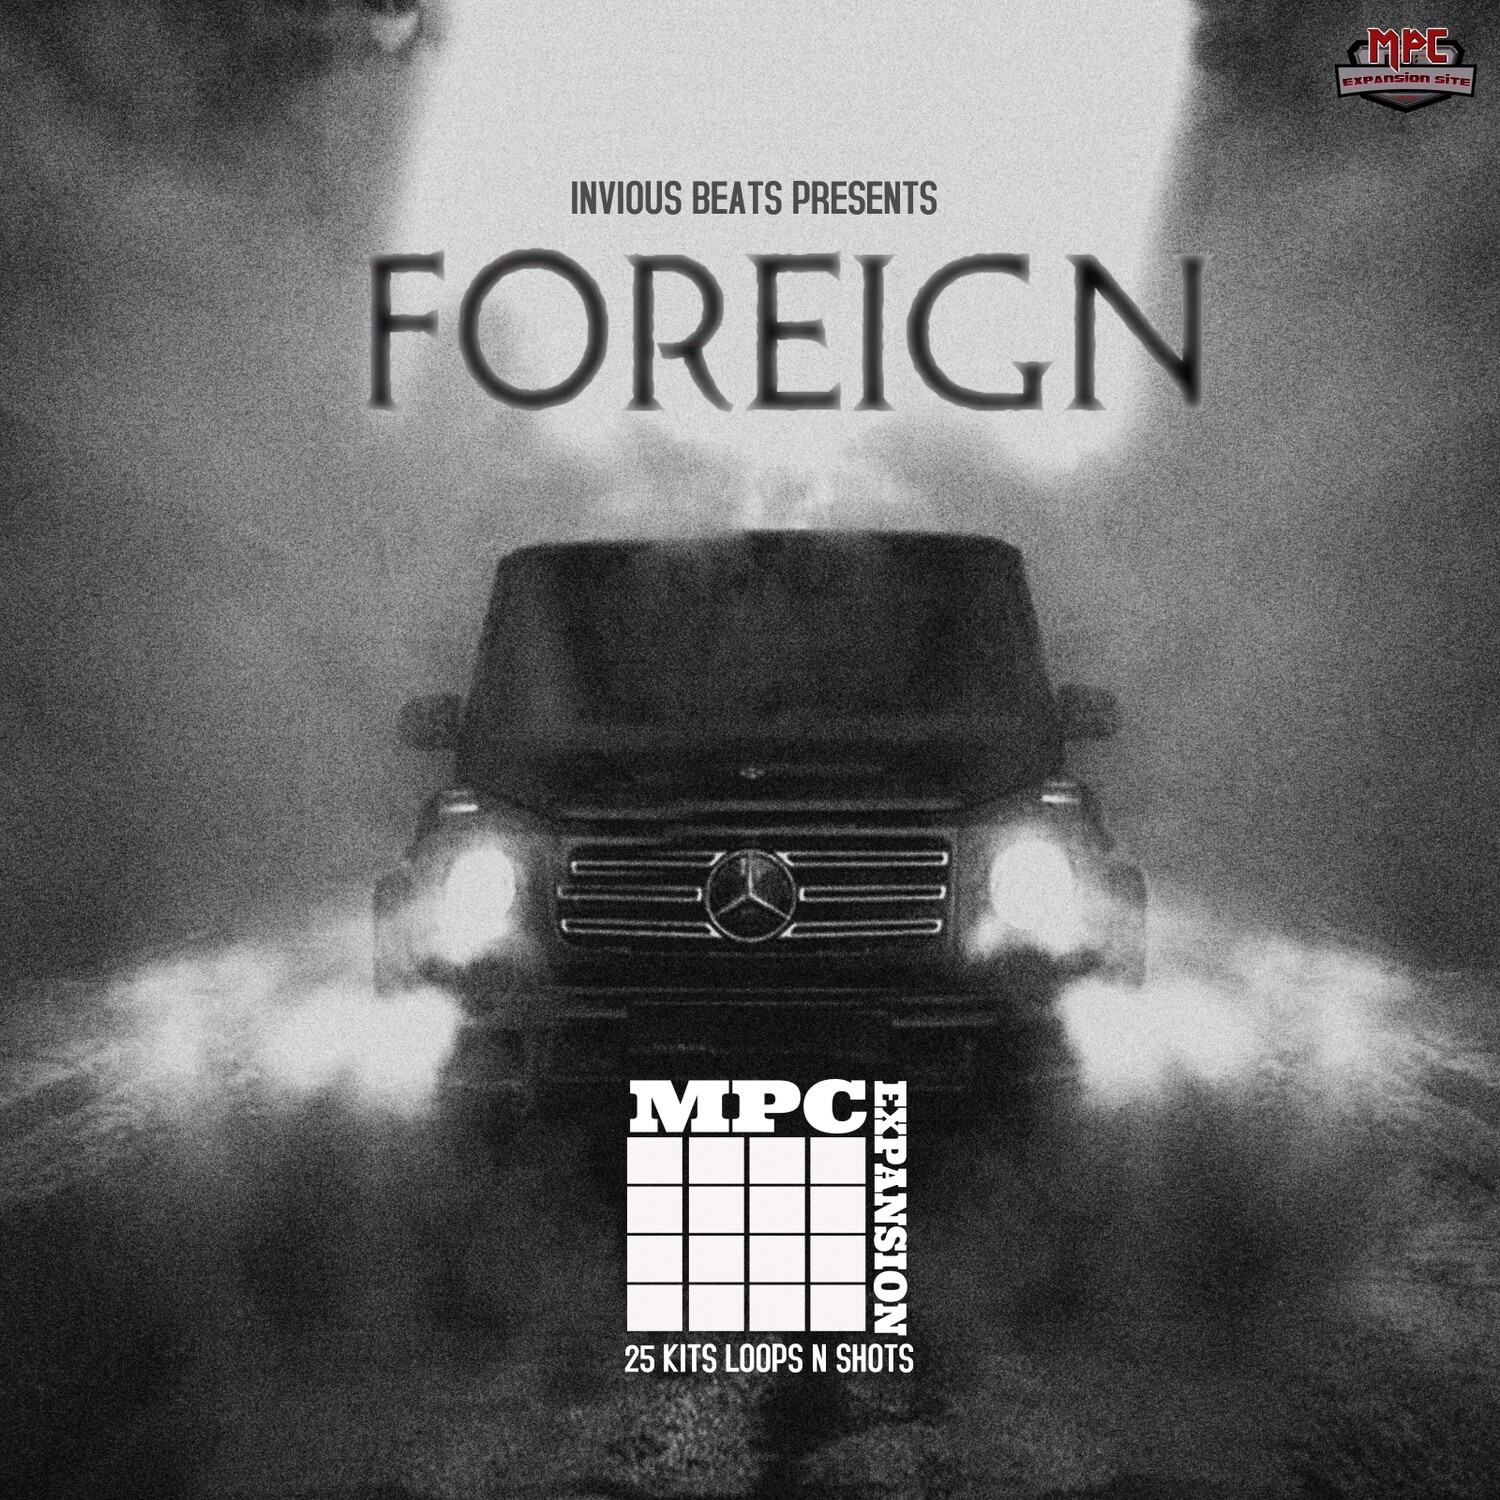 MPC EXPANSION 'FOREIGN' by INVIOUS